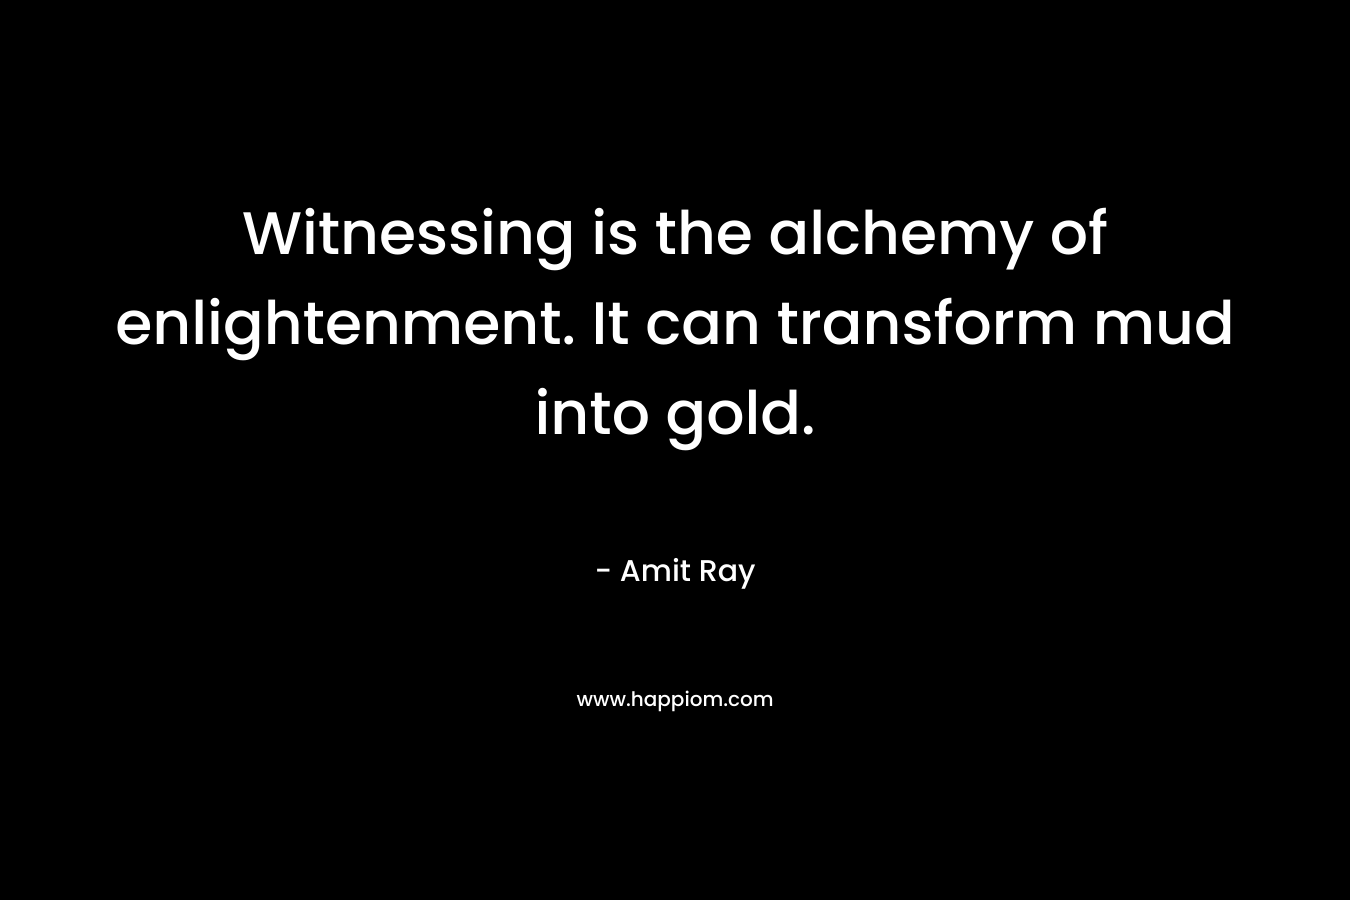 Witnessing is the alchemy of enlightenment. It can transform mud into gold.